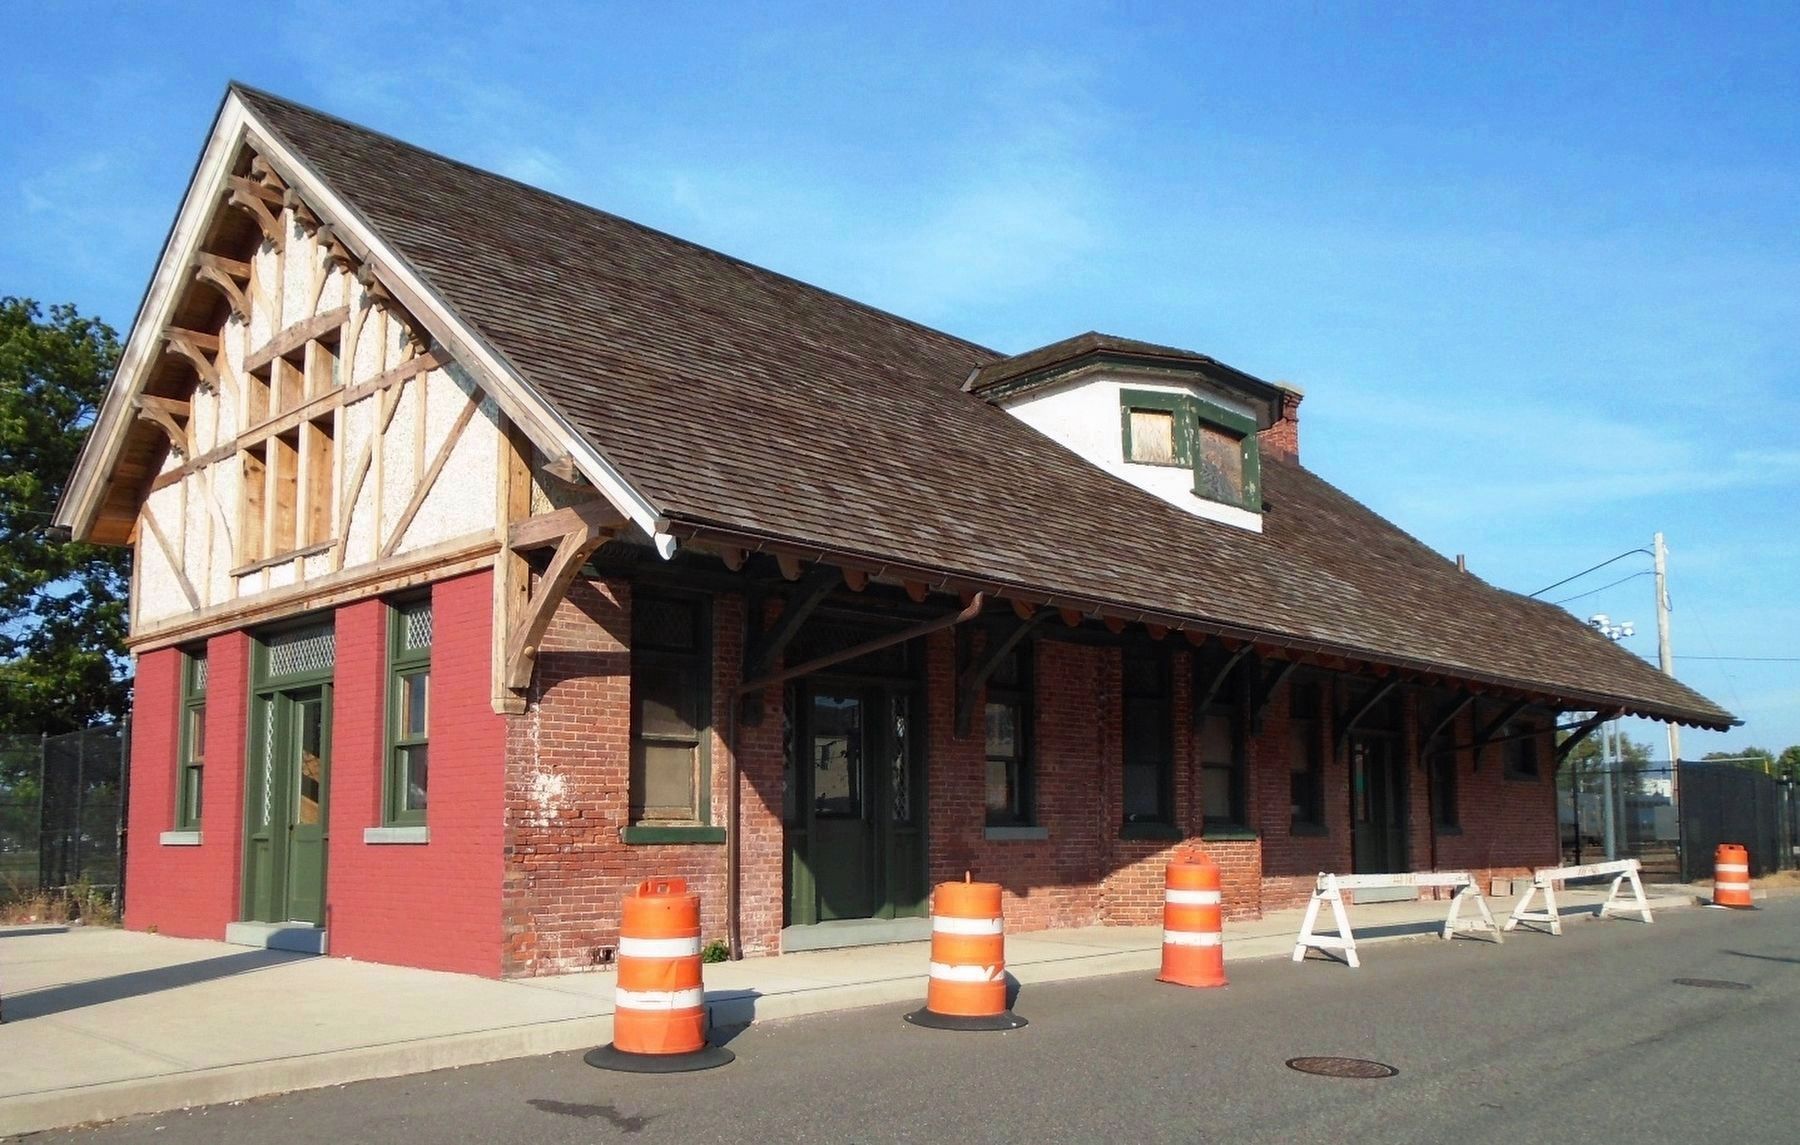 Oyster Bay Railroad Station image. Click for full size.